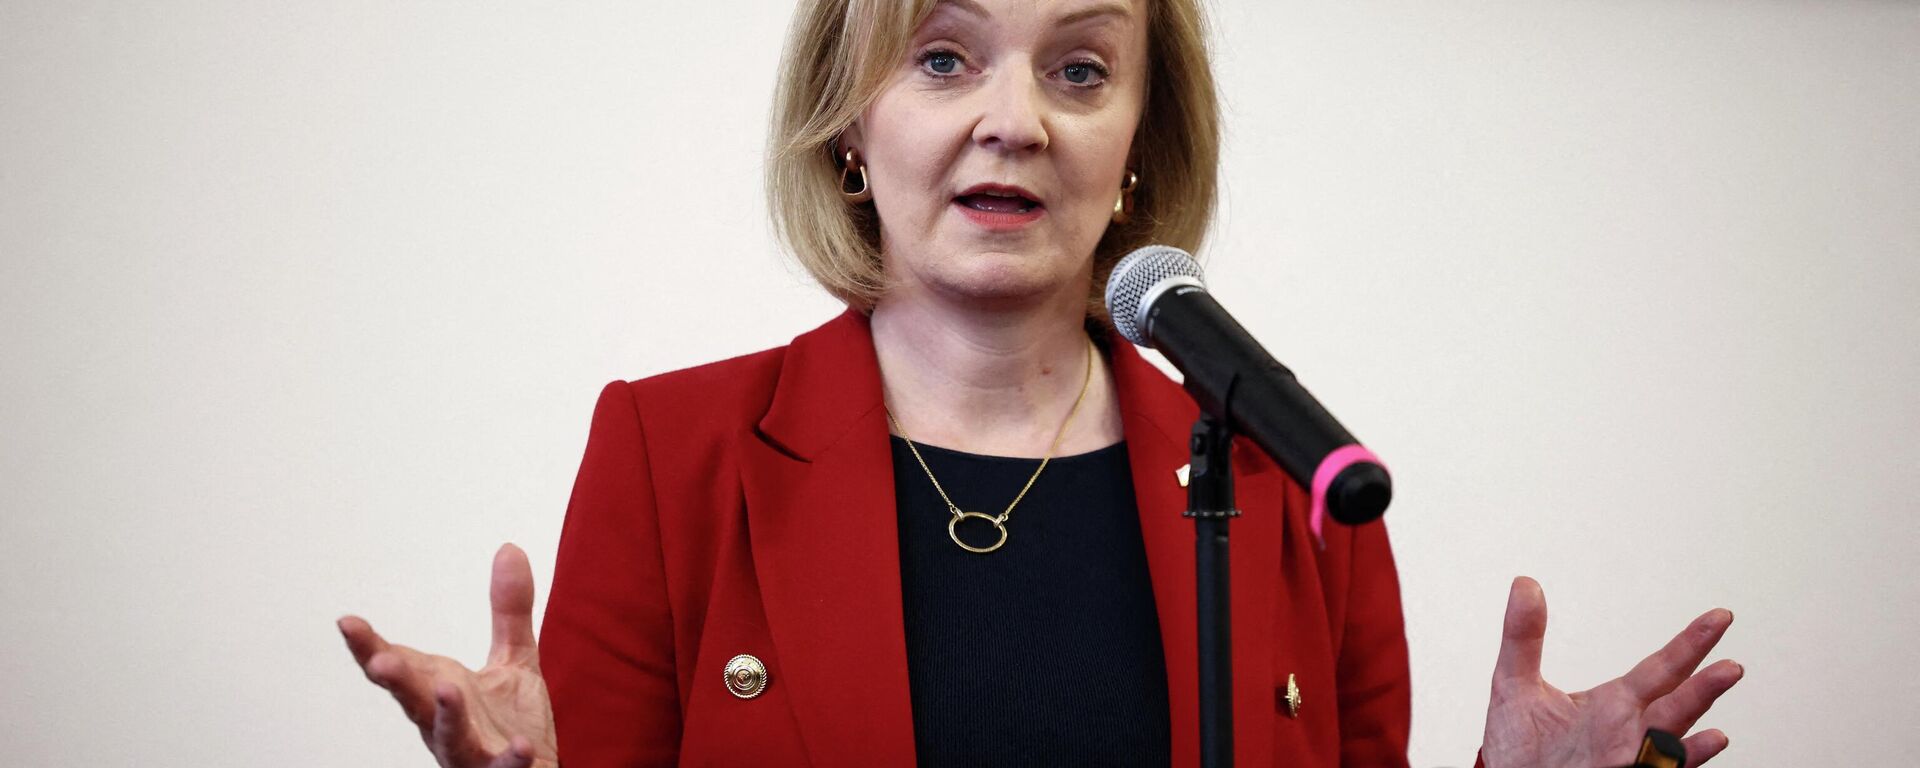 Contender to become the country's next Prime minister and leader of the Conservative party British Foreign Secretary Liz Truss delivers a speech during a campaign event in Leeds, on July 28, 2022 - Sputnik International, 1920, 03.09.2022